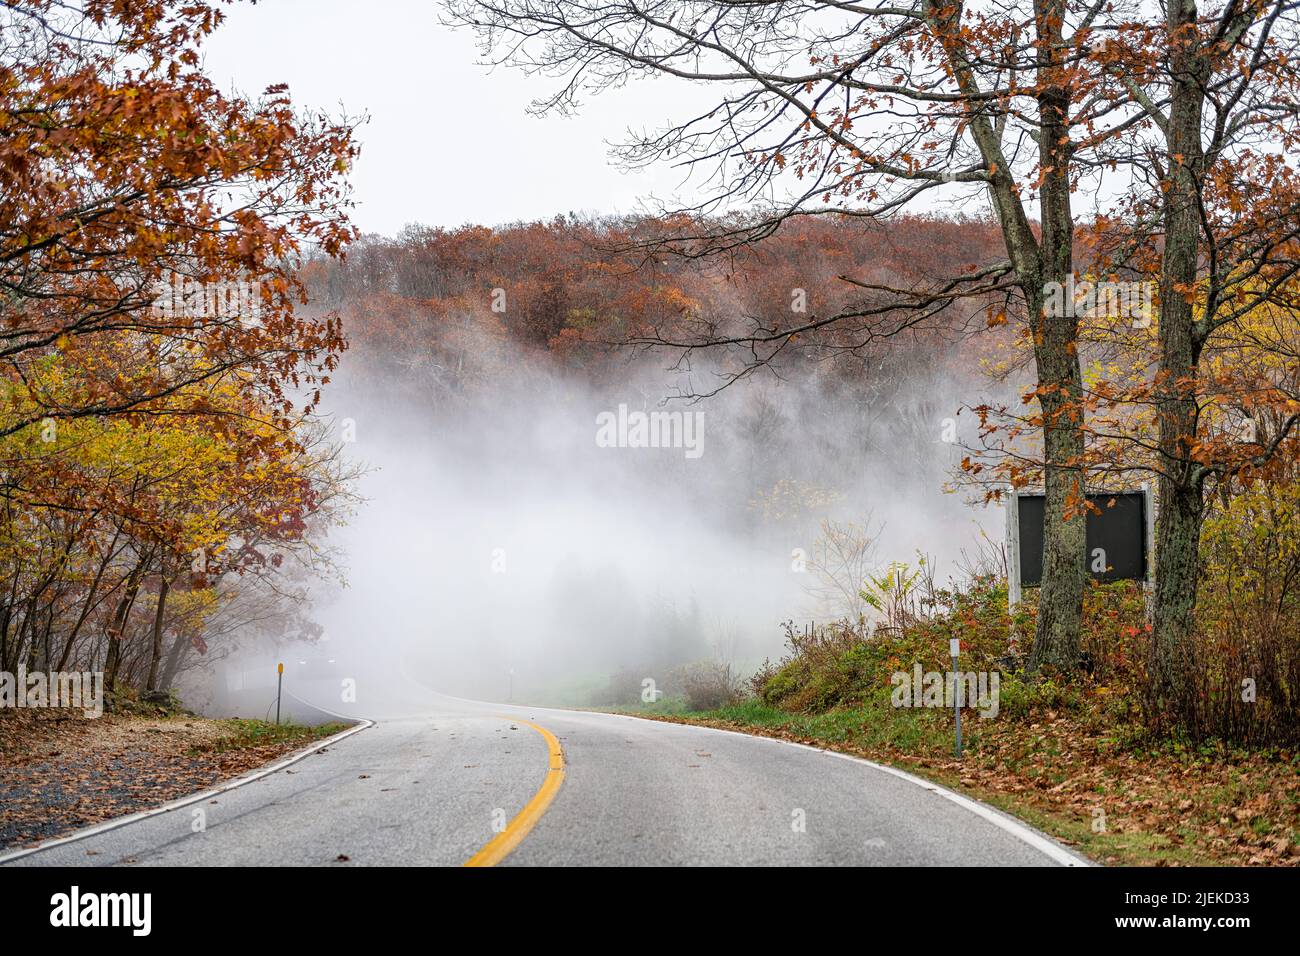 Colorful orange red foliage maple trees leaves in autumn fall season in Wintergreen Resort ski resort town city, Virginia with paved road driving poin Stock Photo